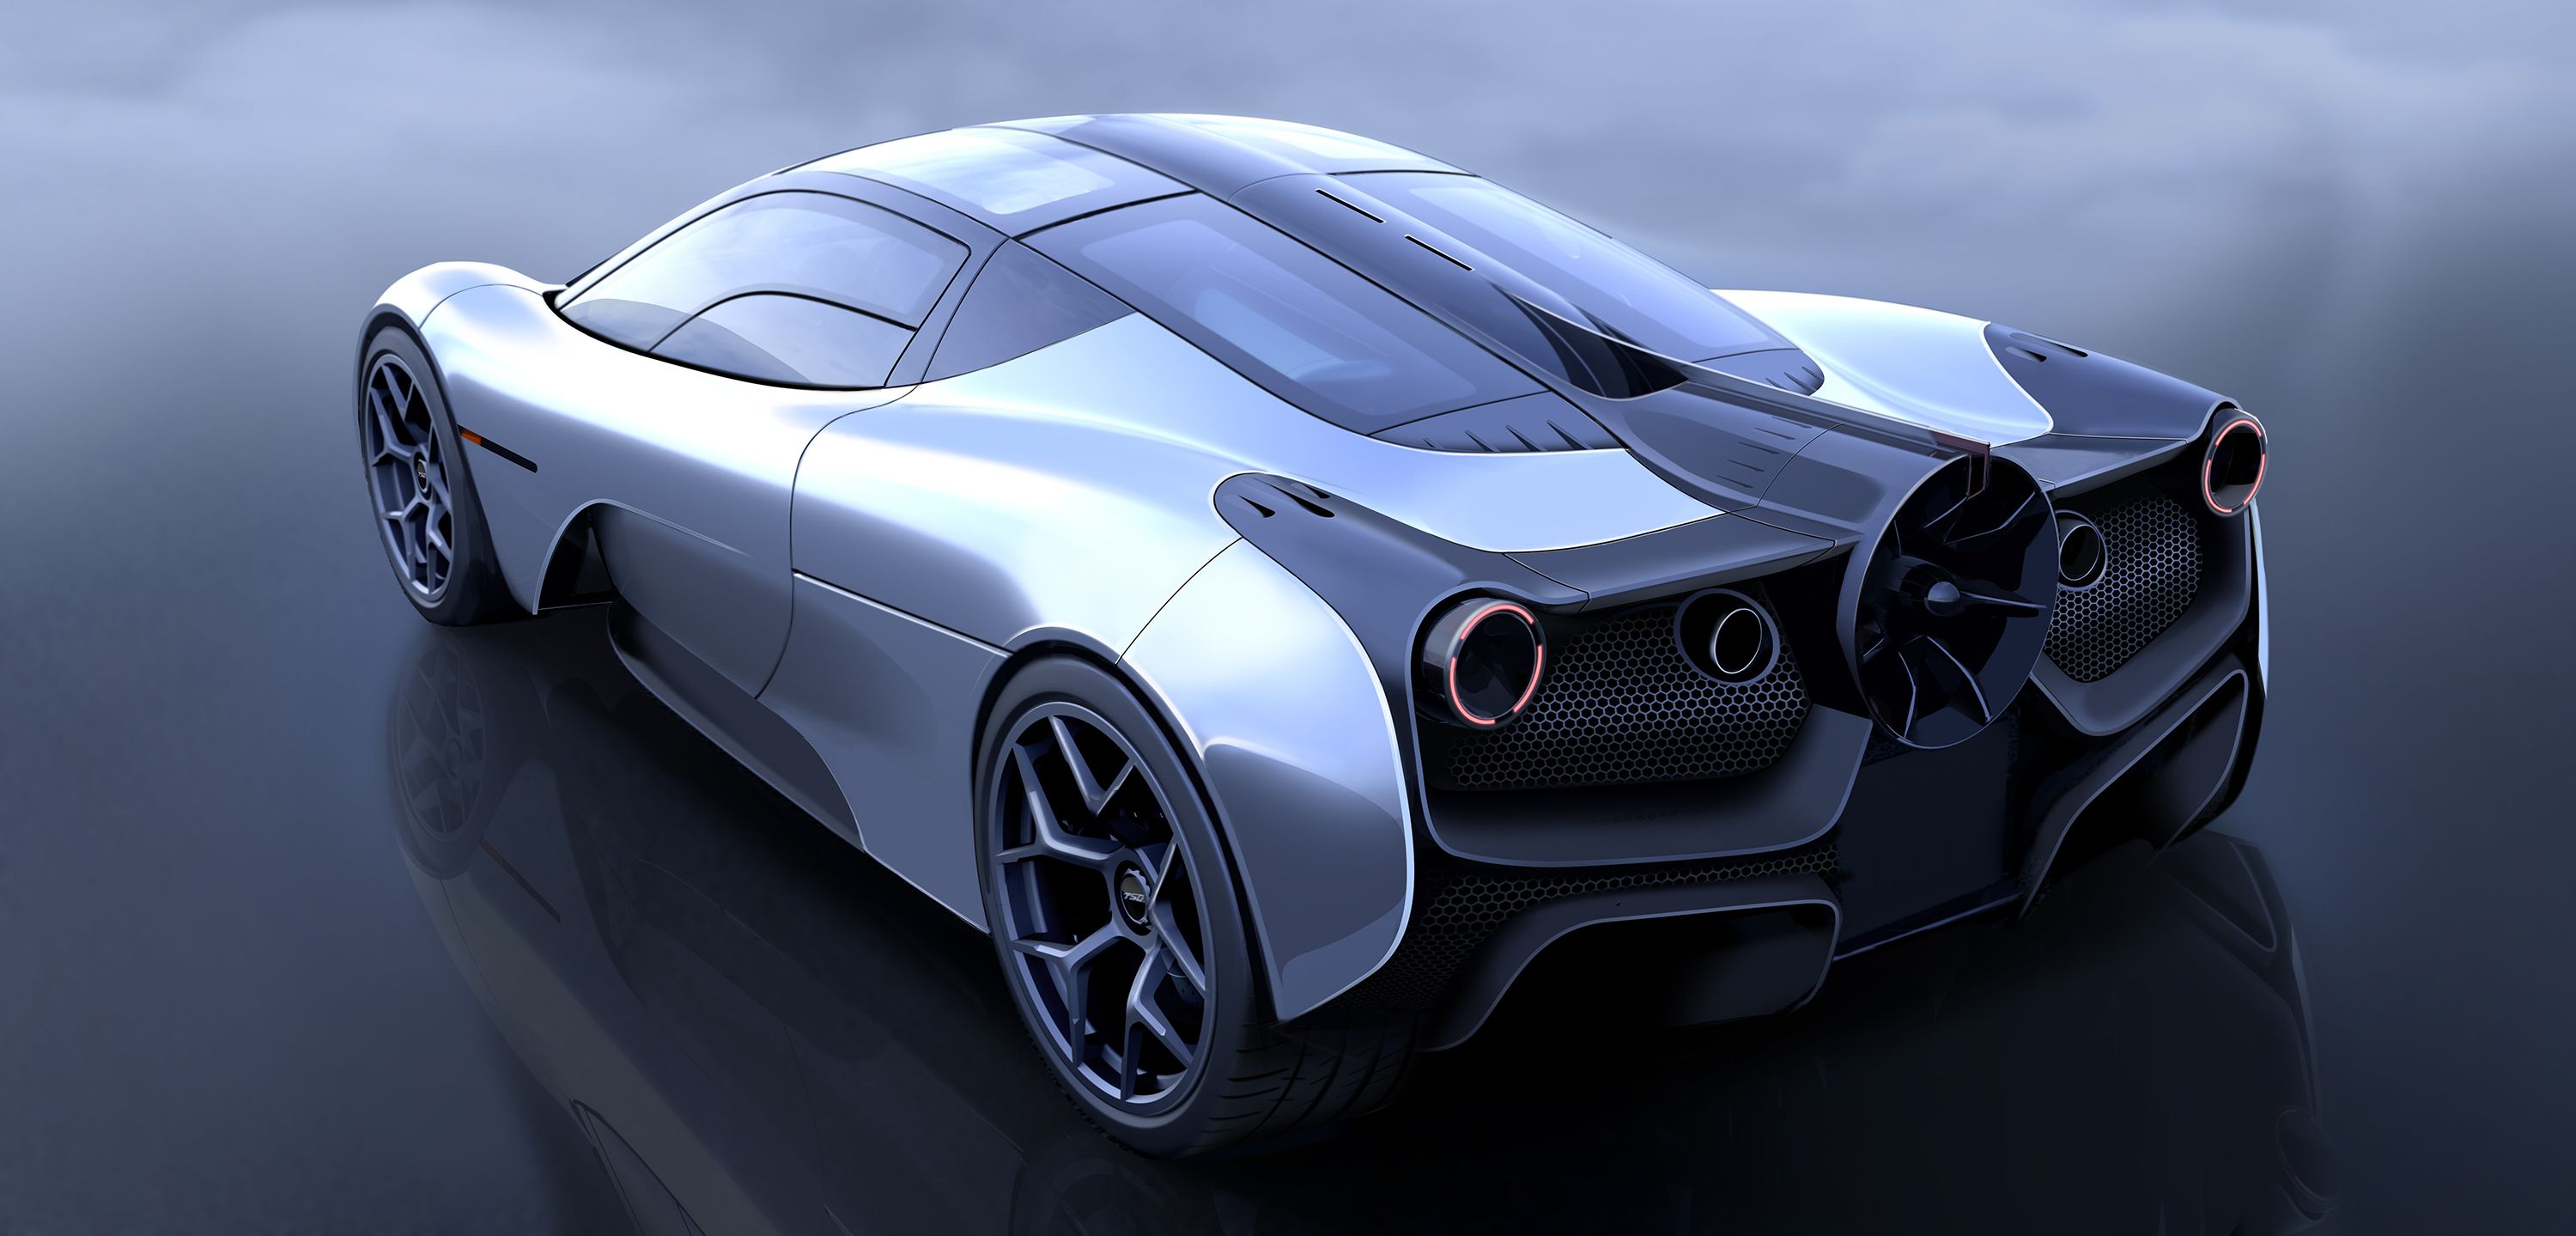 Gordon Murray S T 50 Could Be The Last Great Analog Supercar